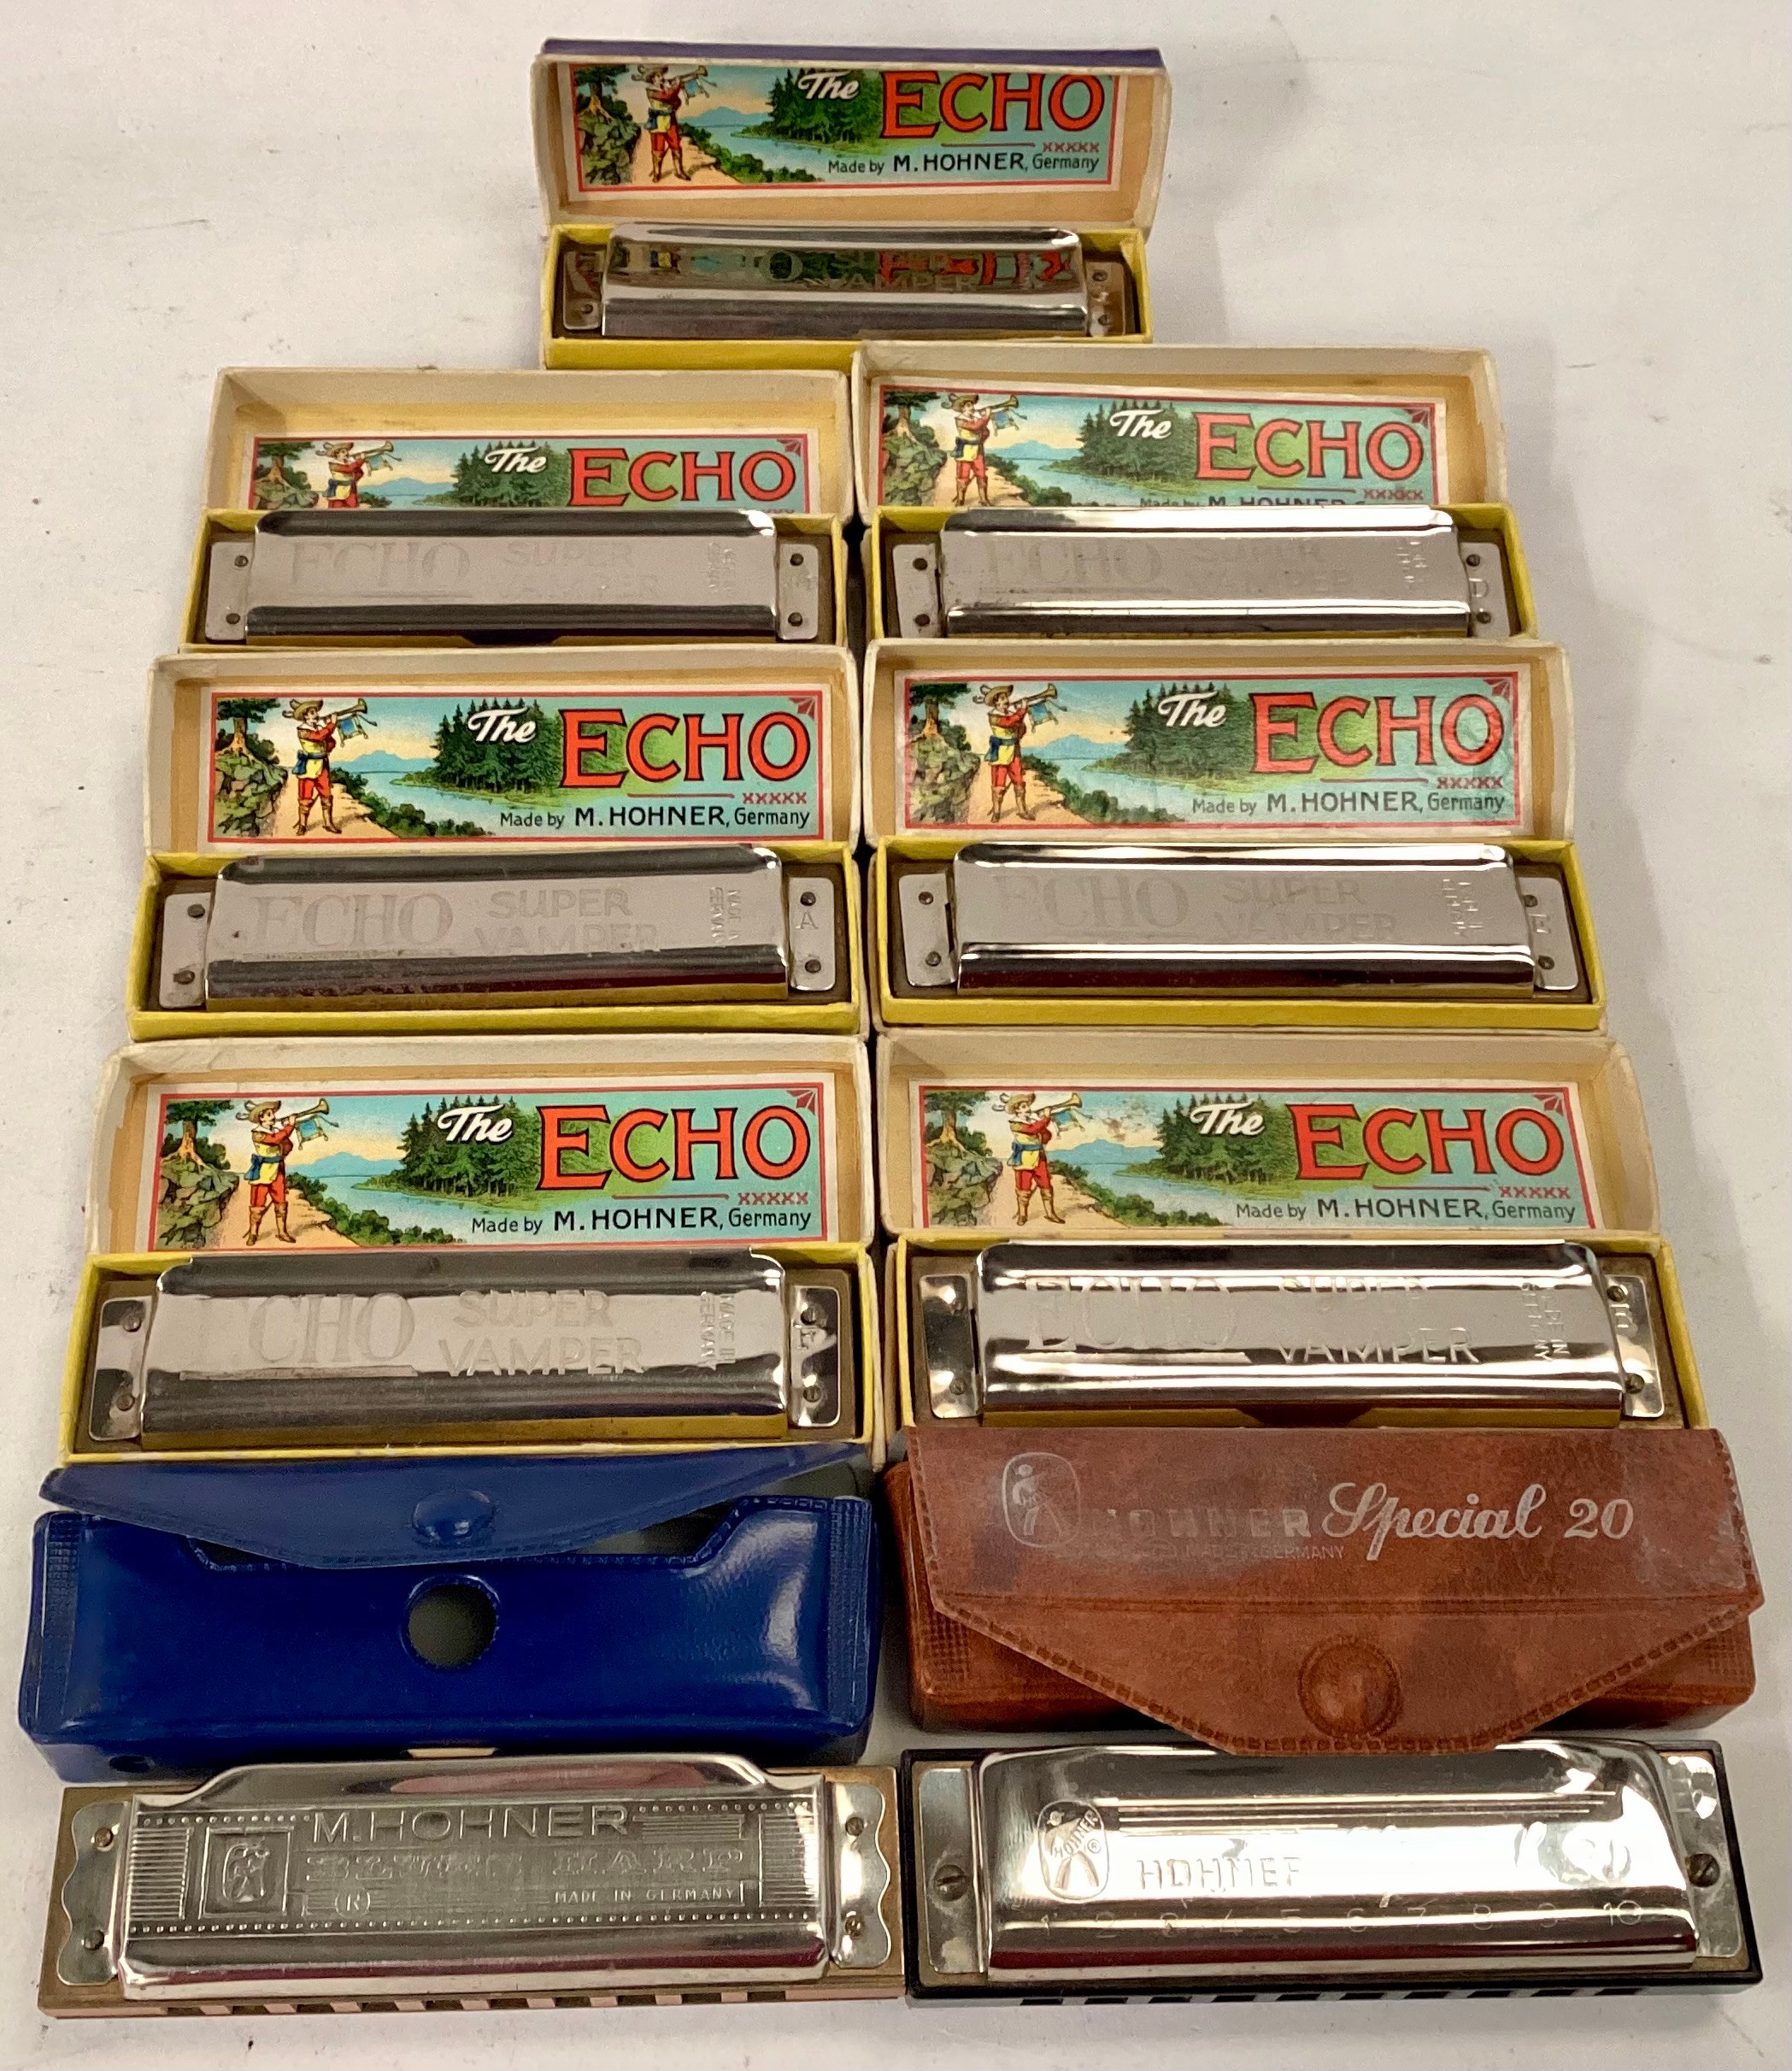 COLLECTION OF 9 HARMONICAS. Here we find a super collection of 9 HOHNER harmonicas all in plastic